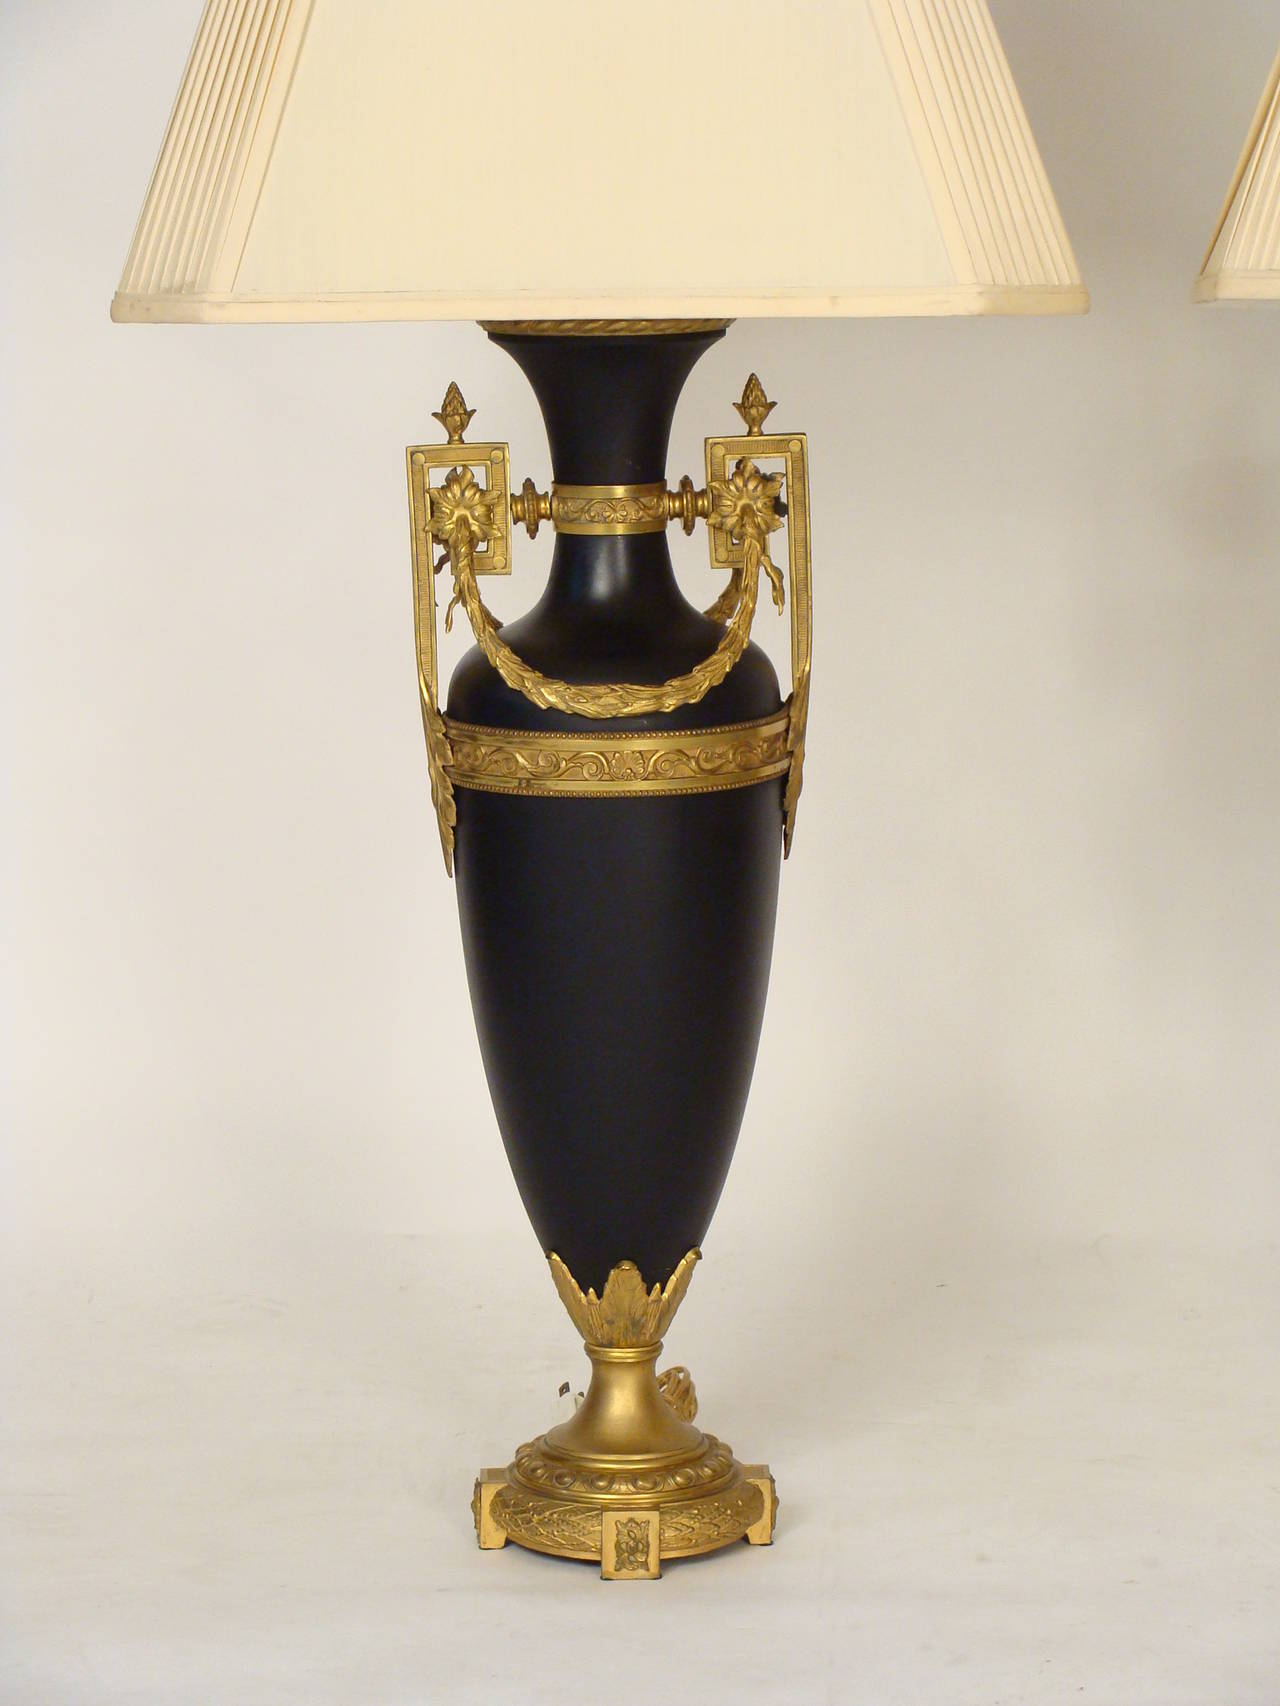 Pair of tole and gilt metal neoclassical style table lamps, circa 1960. Please note the height of the vases are 29